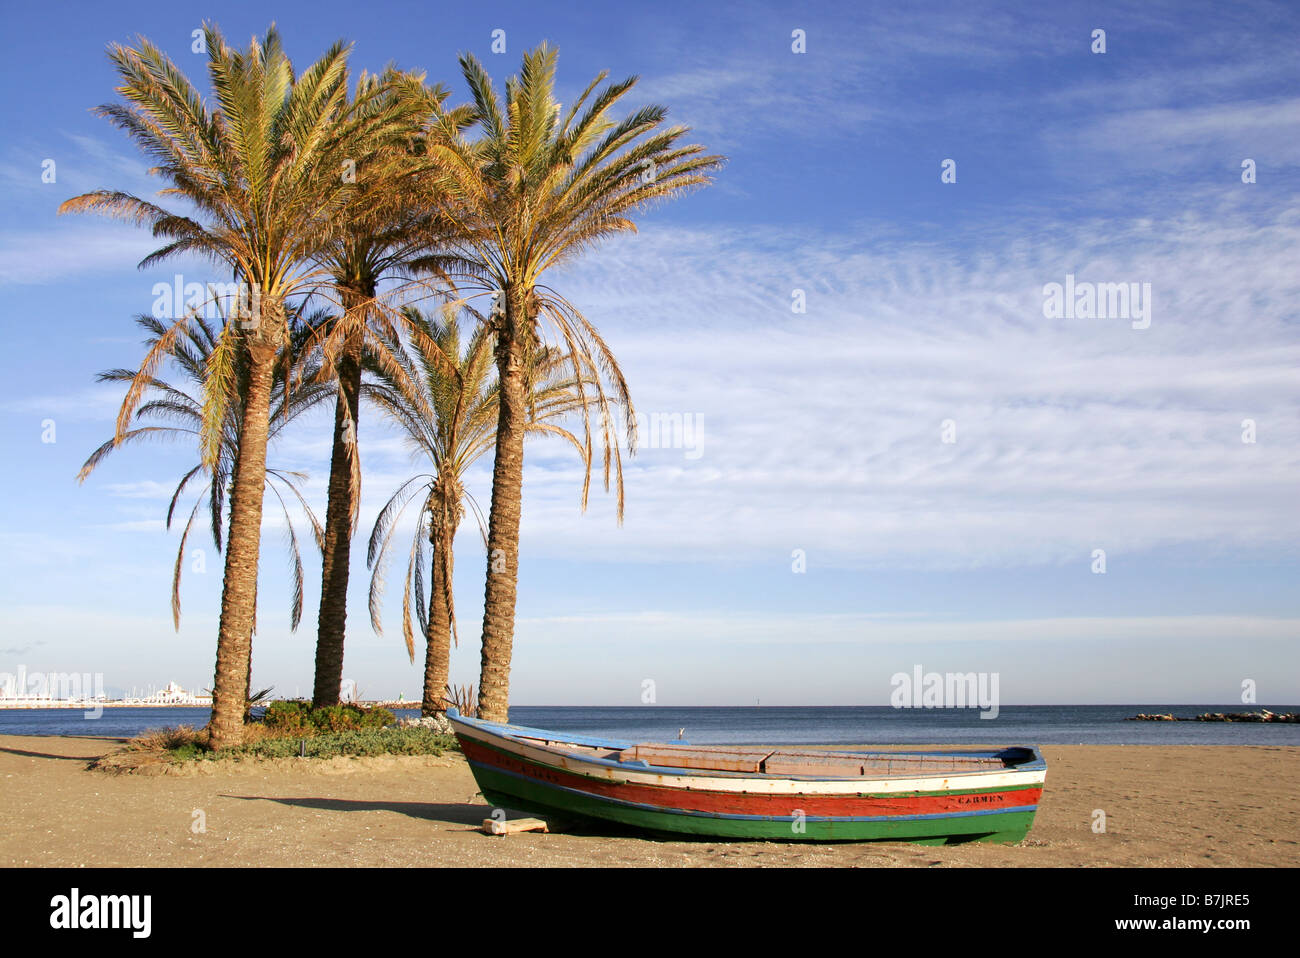 Wooden boat and palm trees on the beach at Benalmadina Costa Del Sol Malaga Andalucia Spain Stock Photo